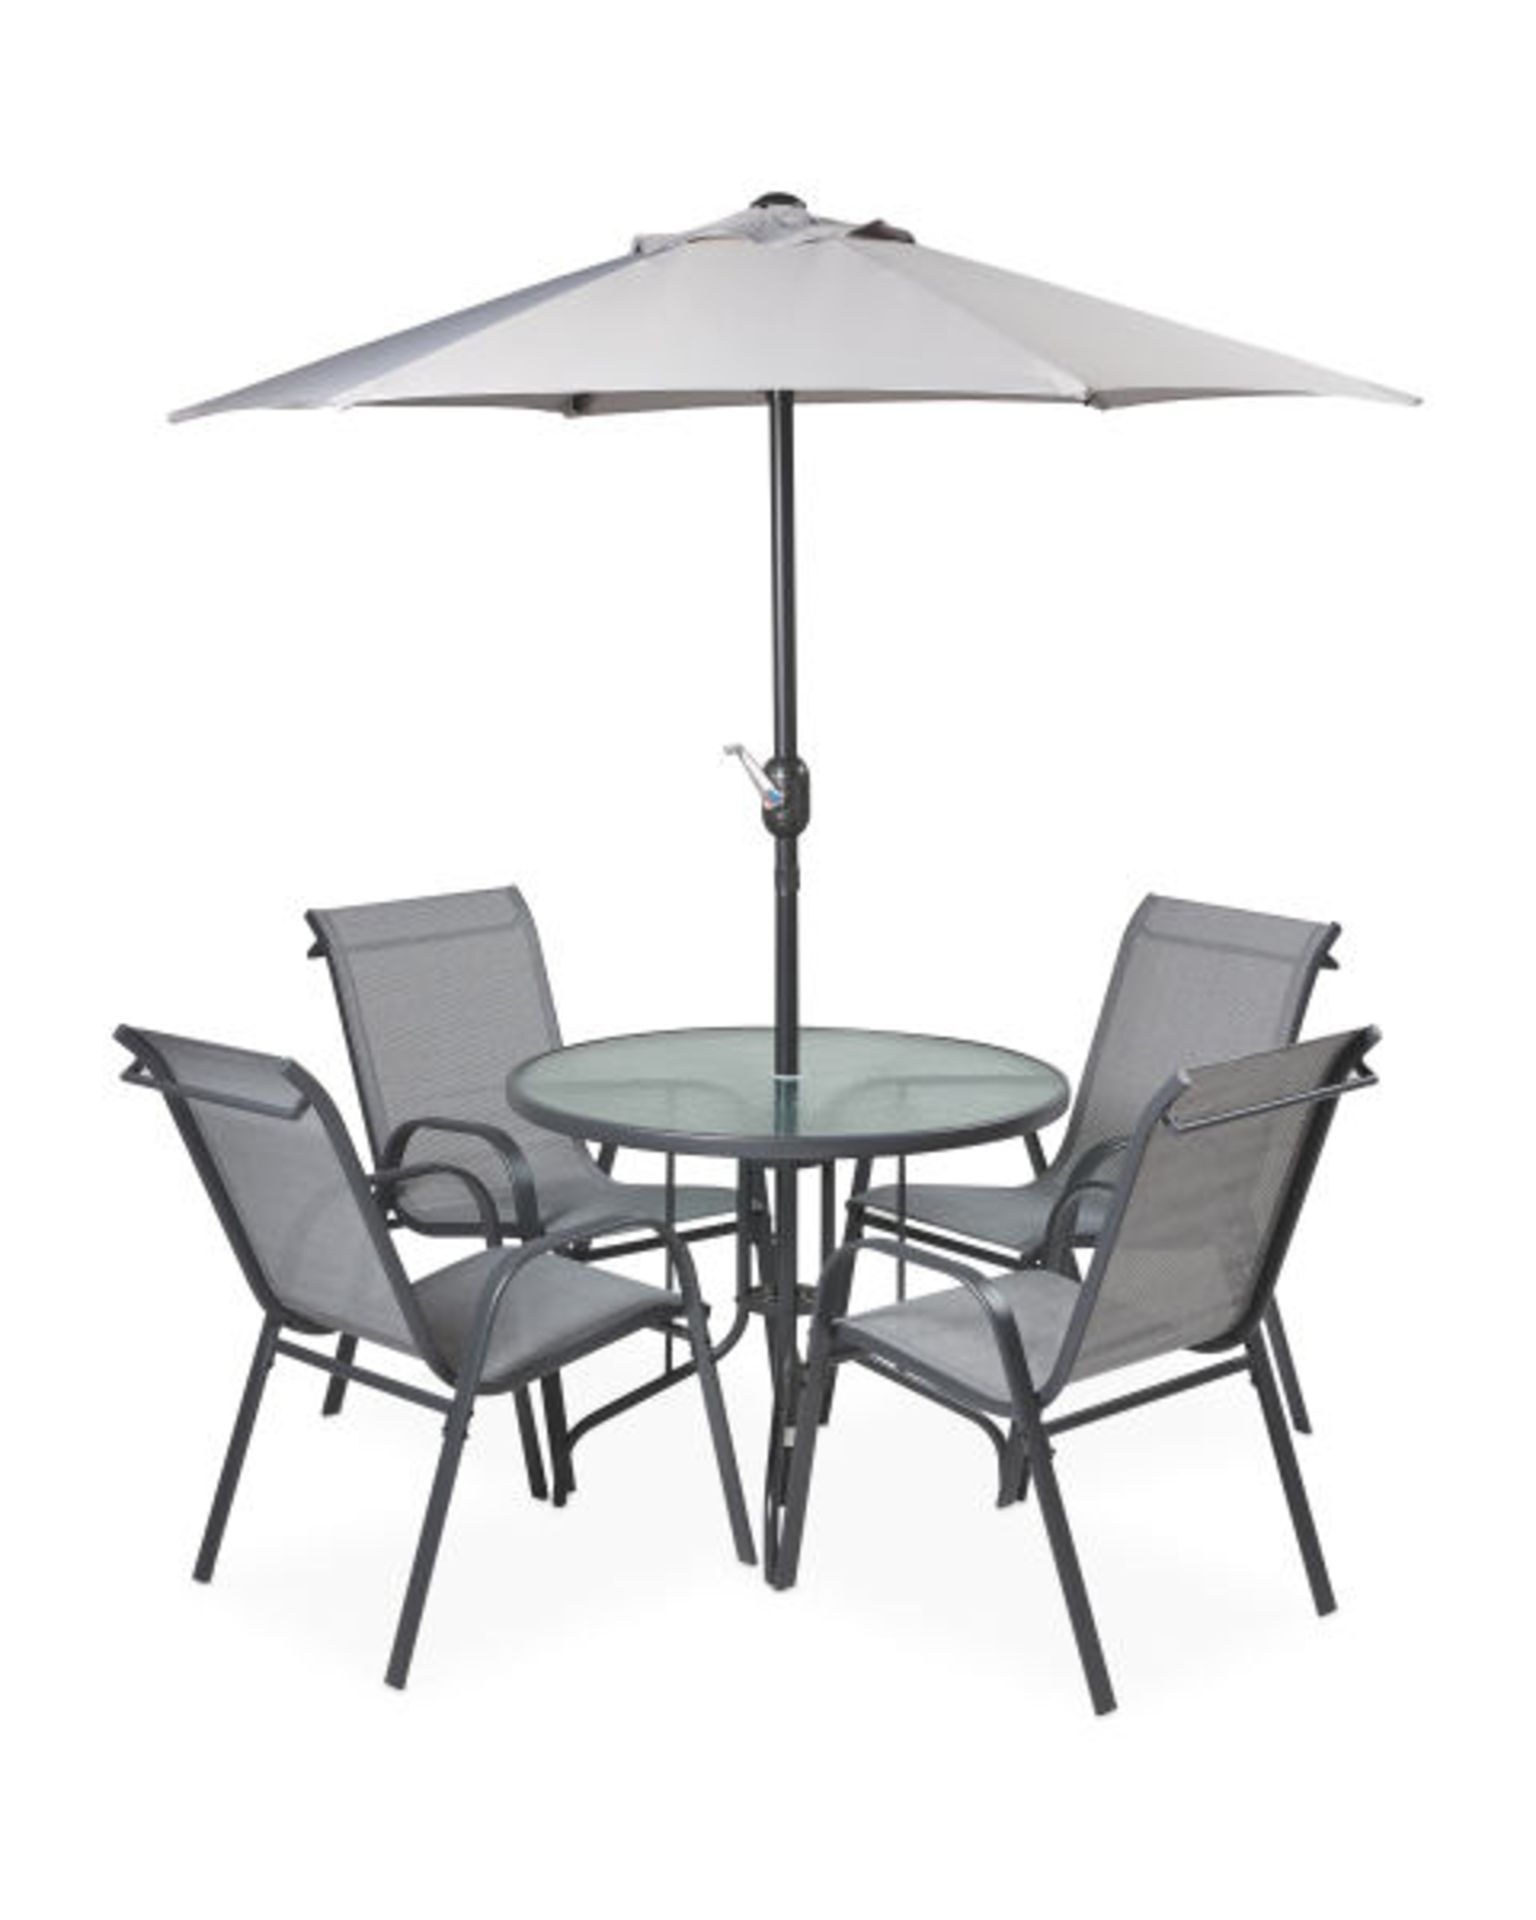 * LATE ADDED LOT* Luxury 6 Piece Patio Furniture Set. Give your garden a new look with the 6 Piece